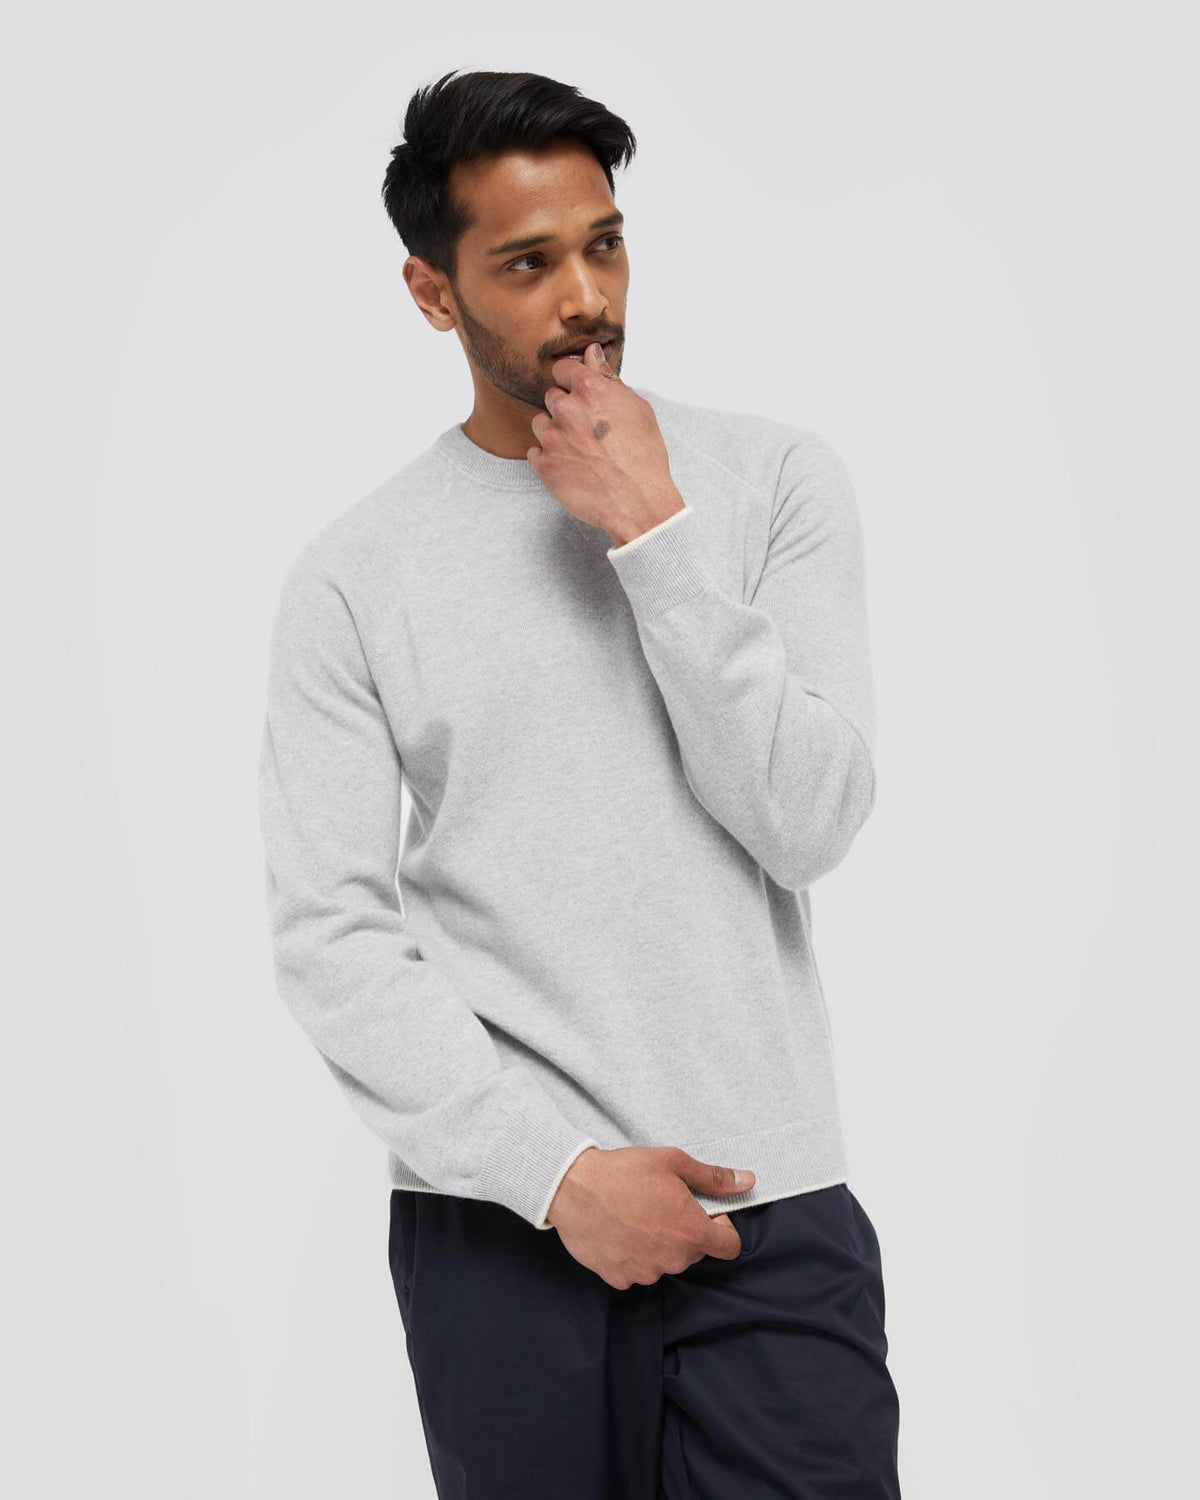 Cadorna Wool and Cashmere Unisex Sweater